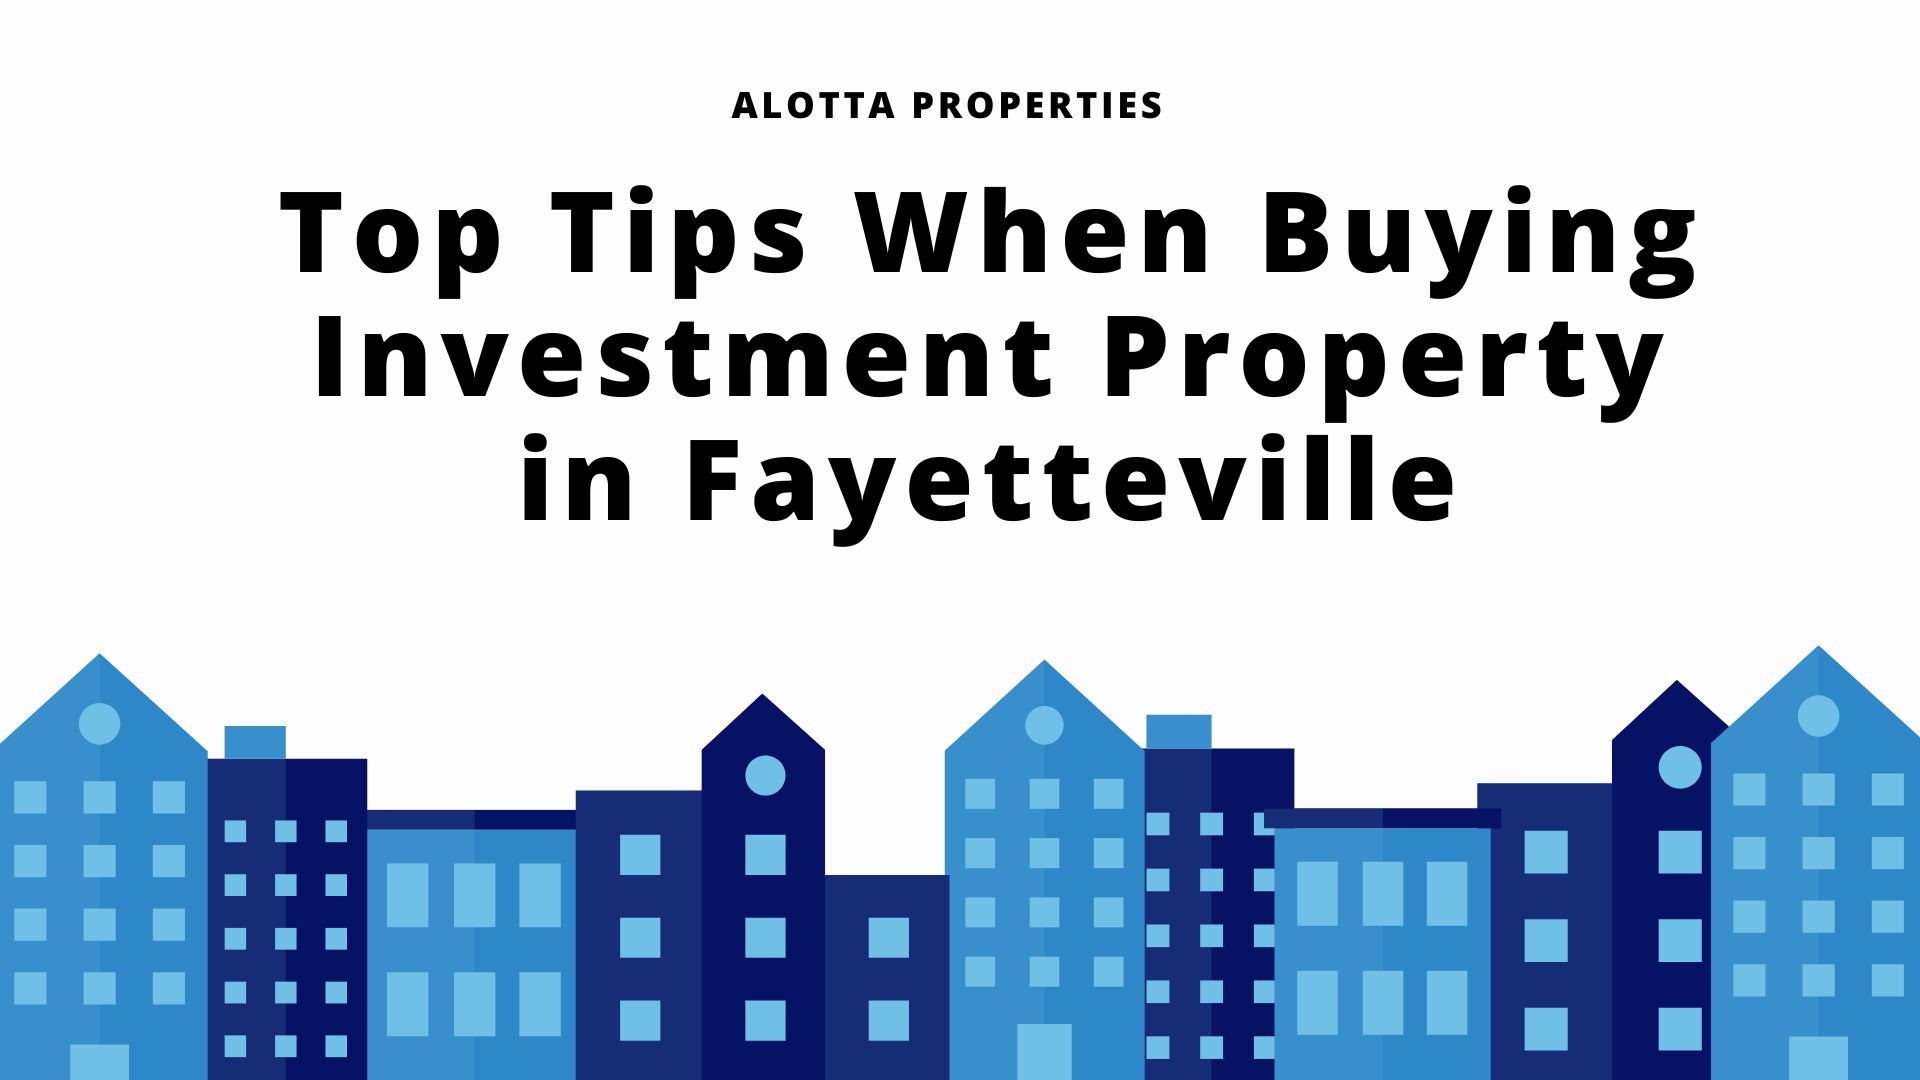 Top Tips When Buying Investment Property in Fayetteville